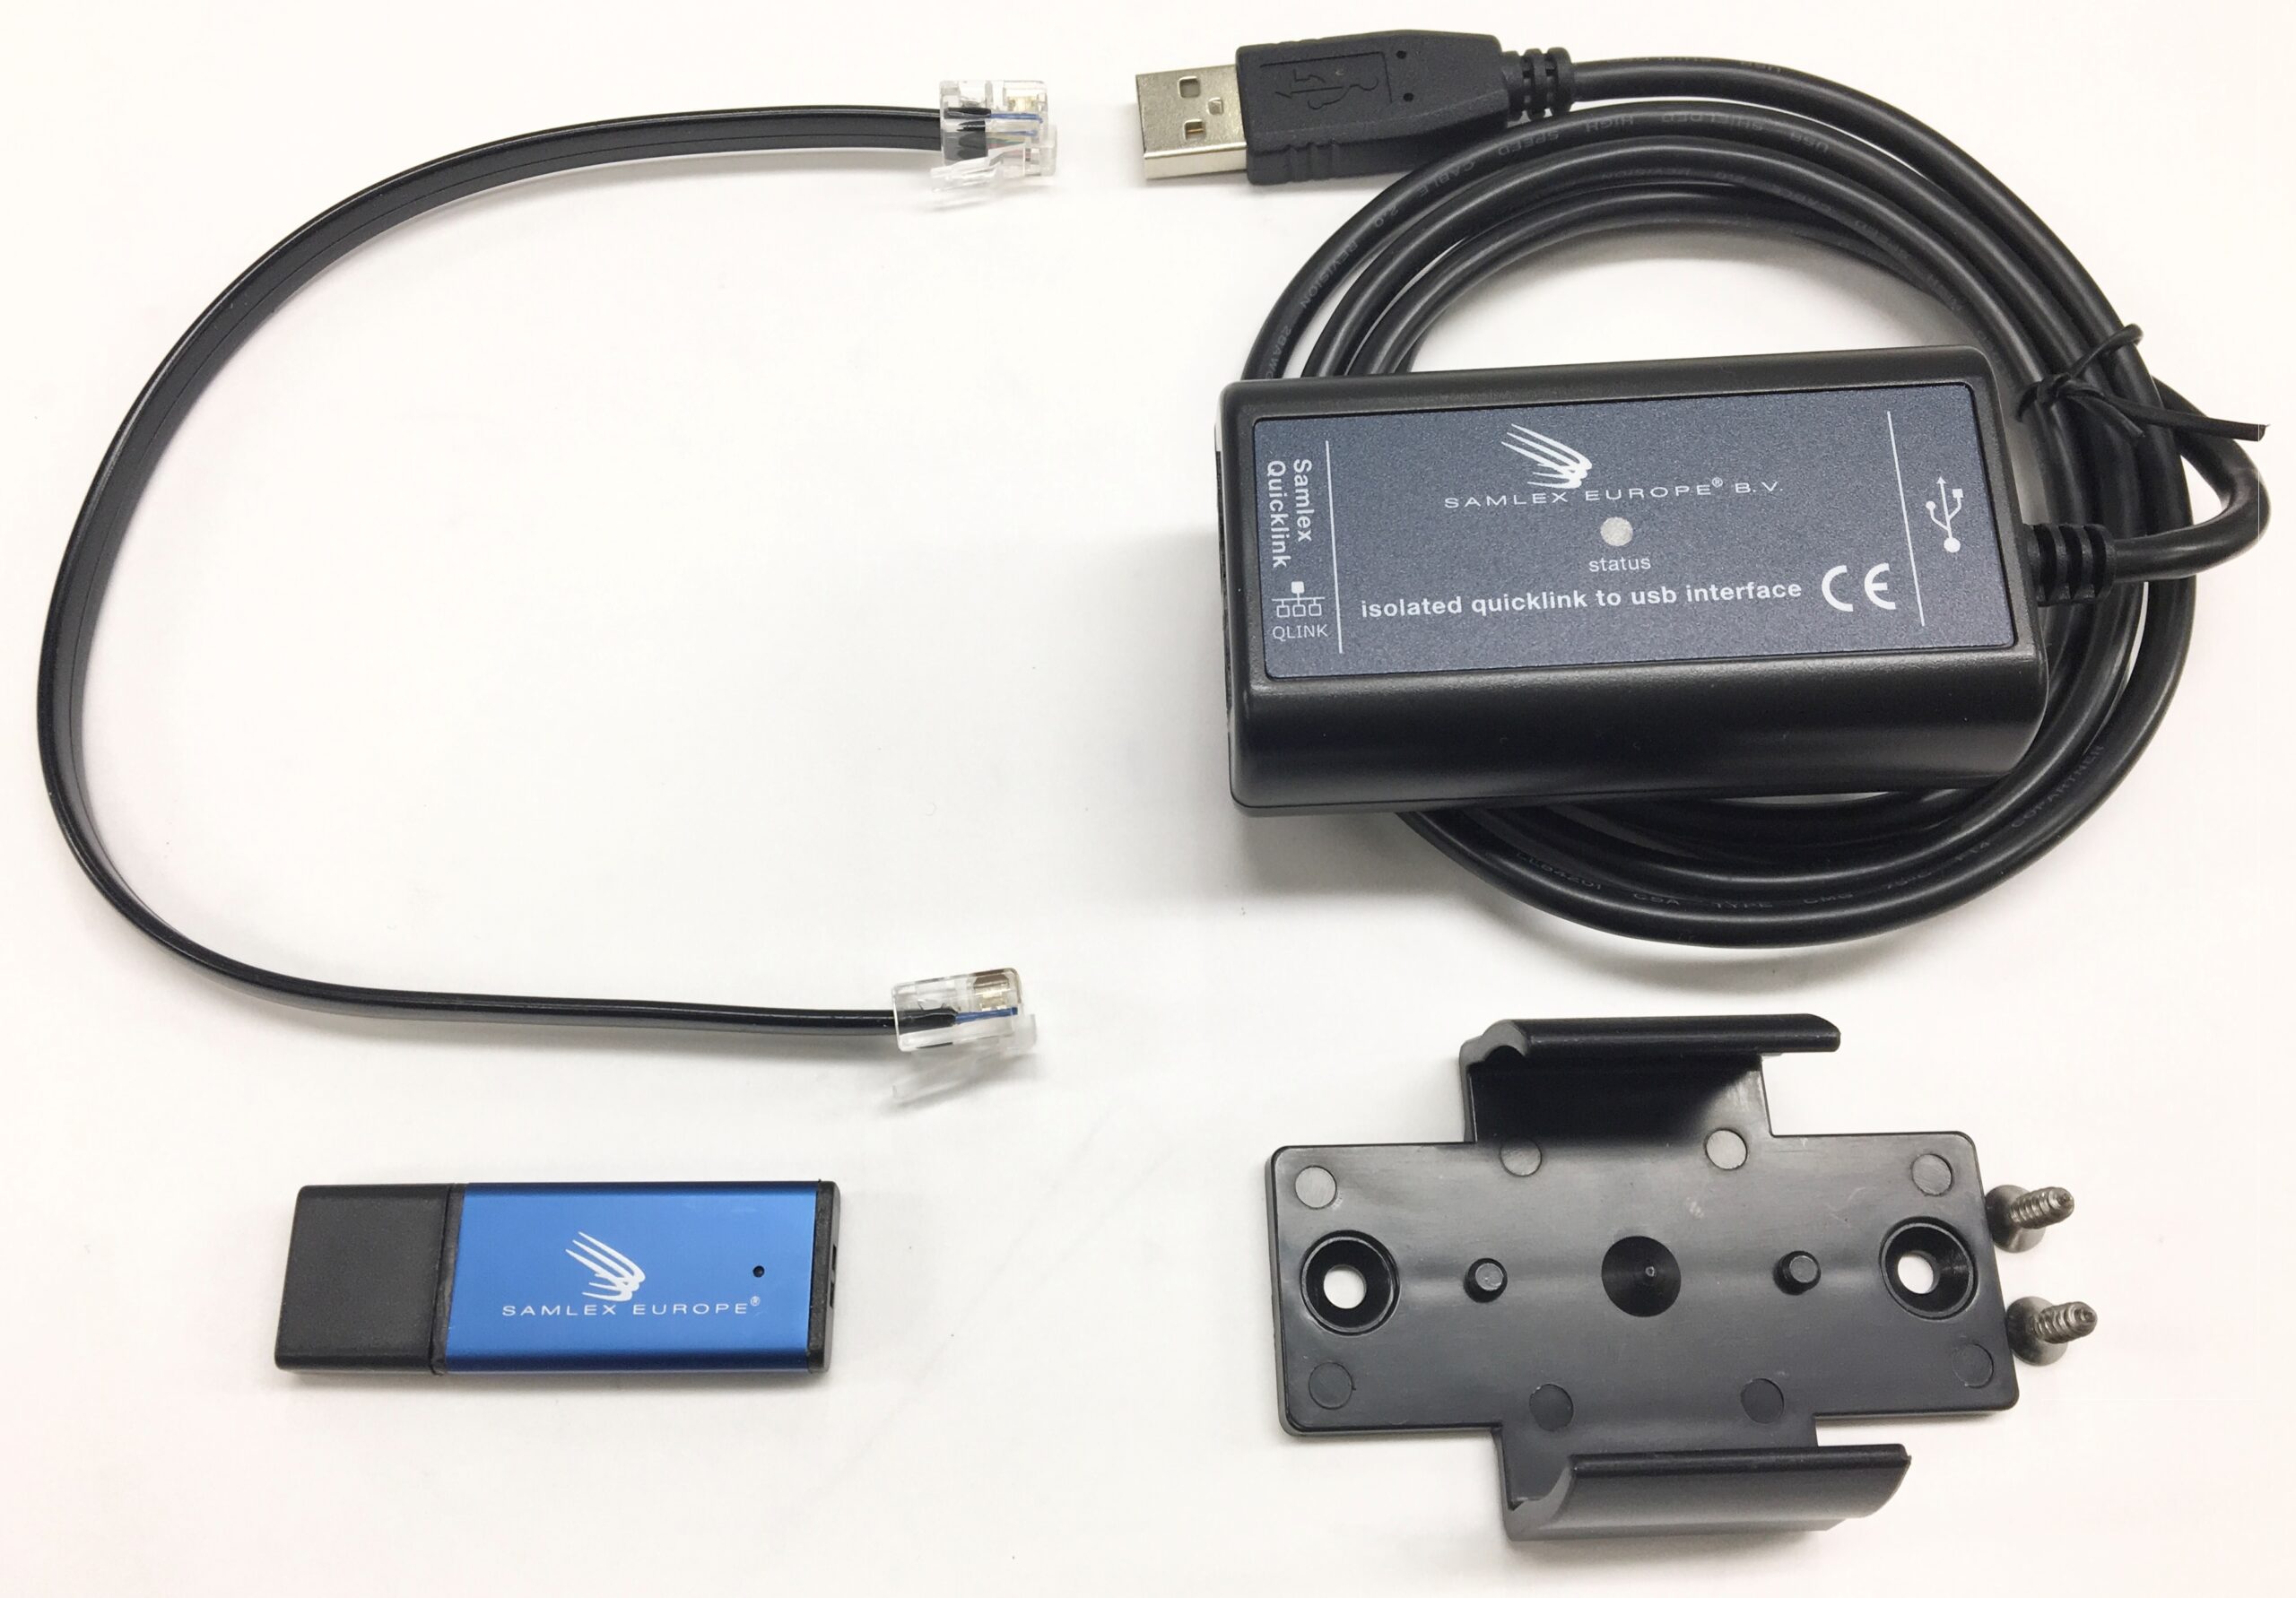 QuickLink to USB interface kit